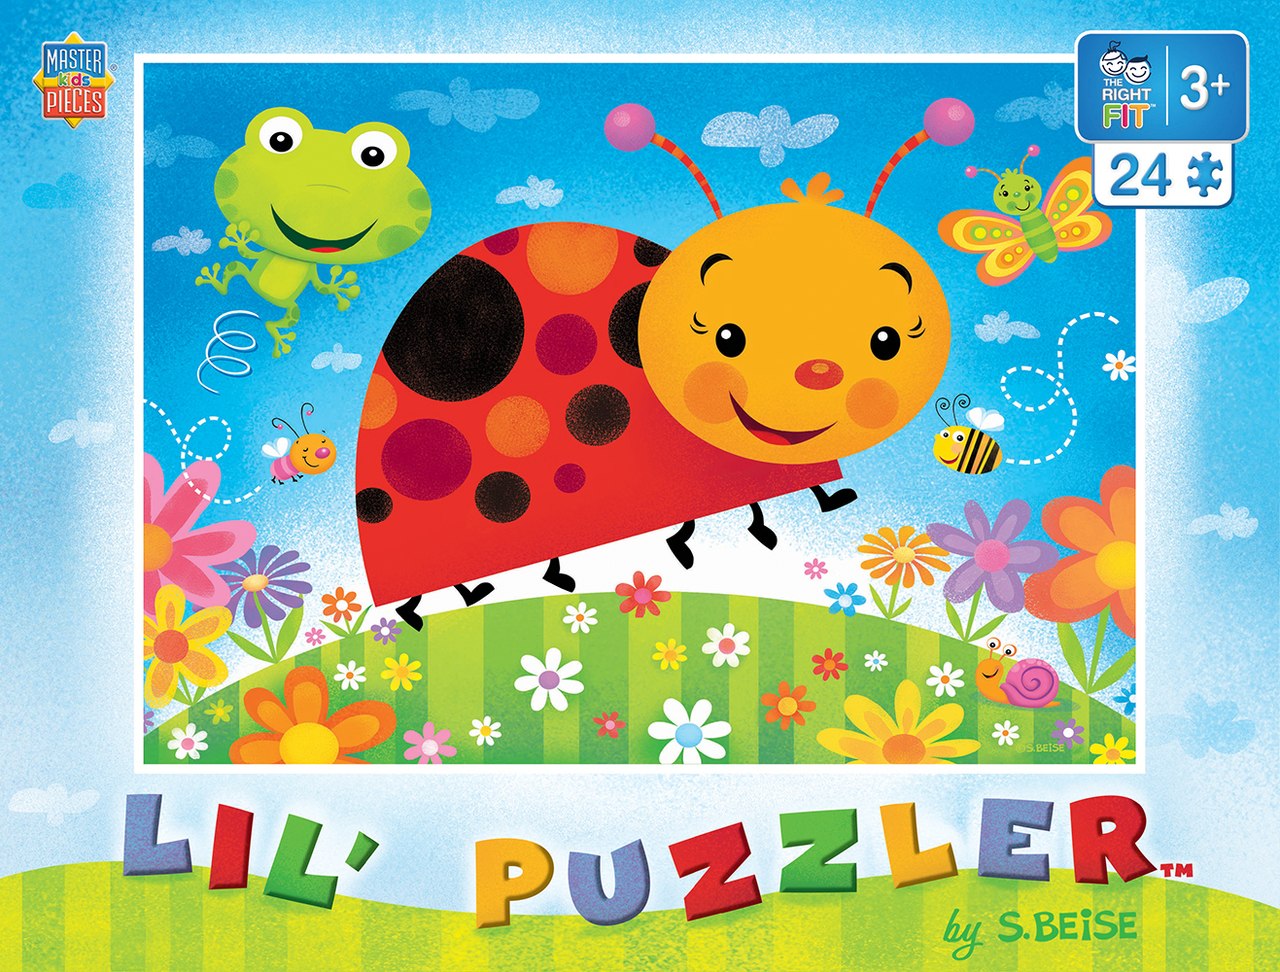 Lil Puzzler: Bug Buddies - 24pc Jigsaw Puzzle by Masterpieces  			  					NEW - image 1